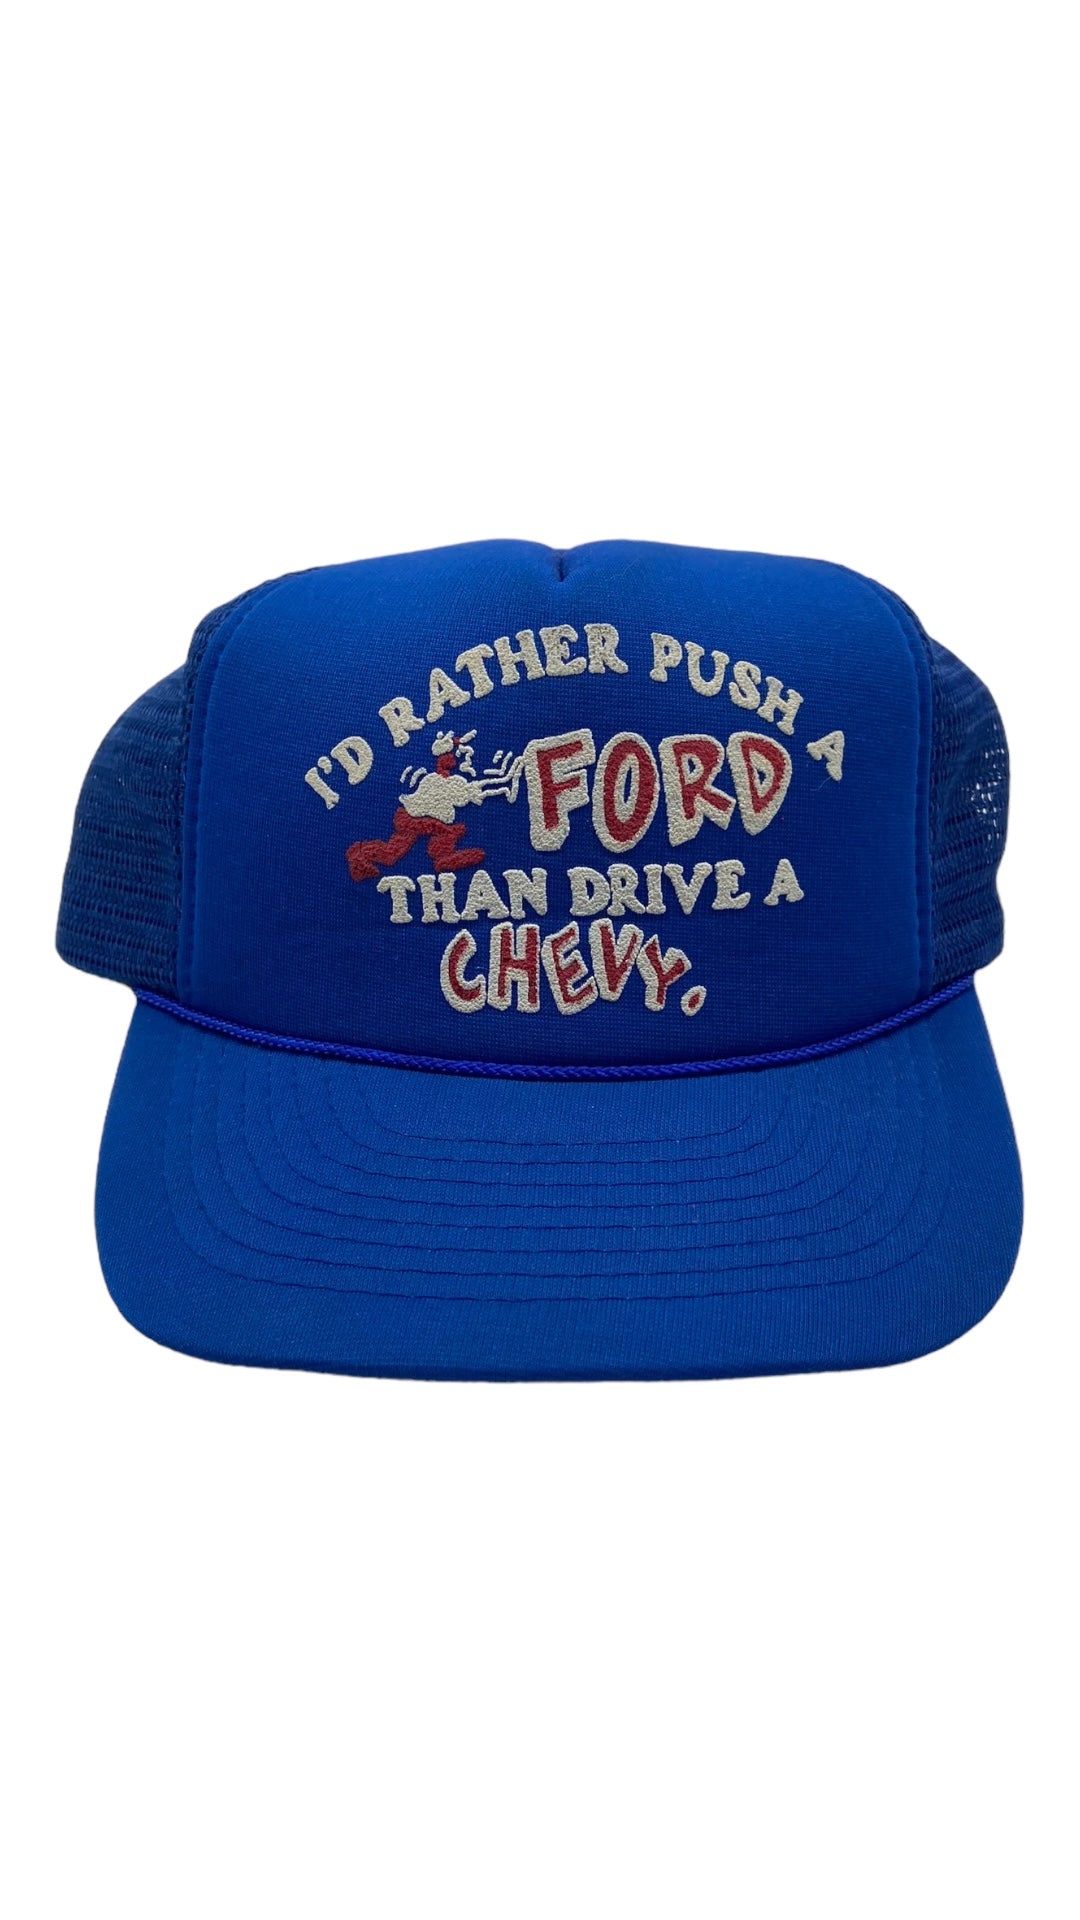 Load image into Gallery viewer, VTG Rather Push a Ford Trucker Snapback
